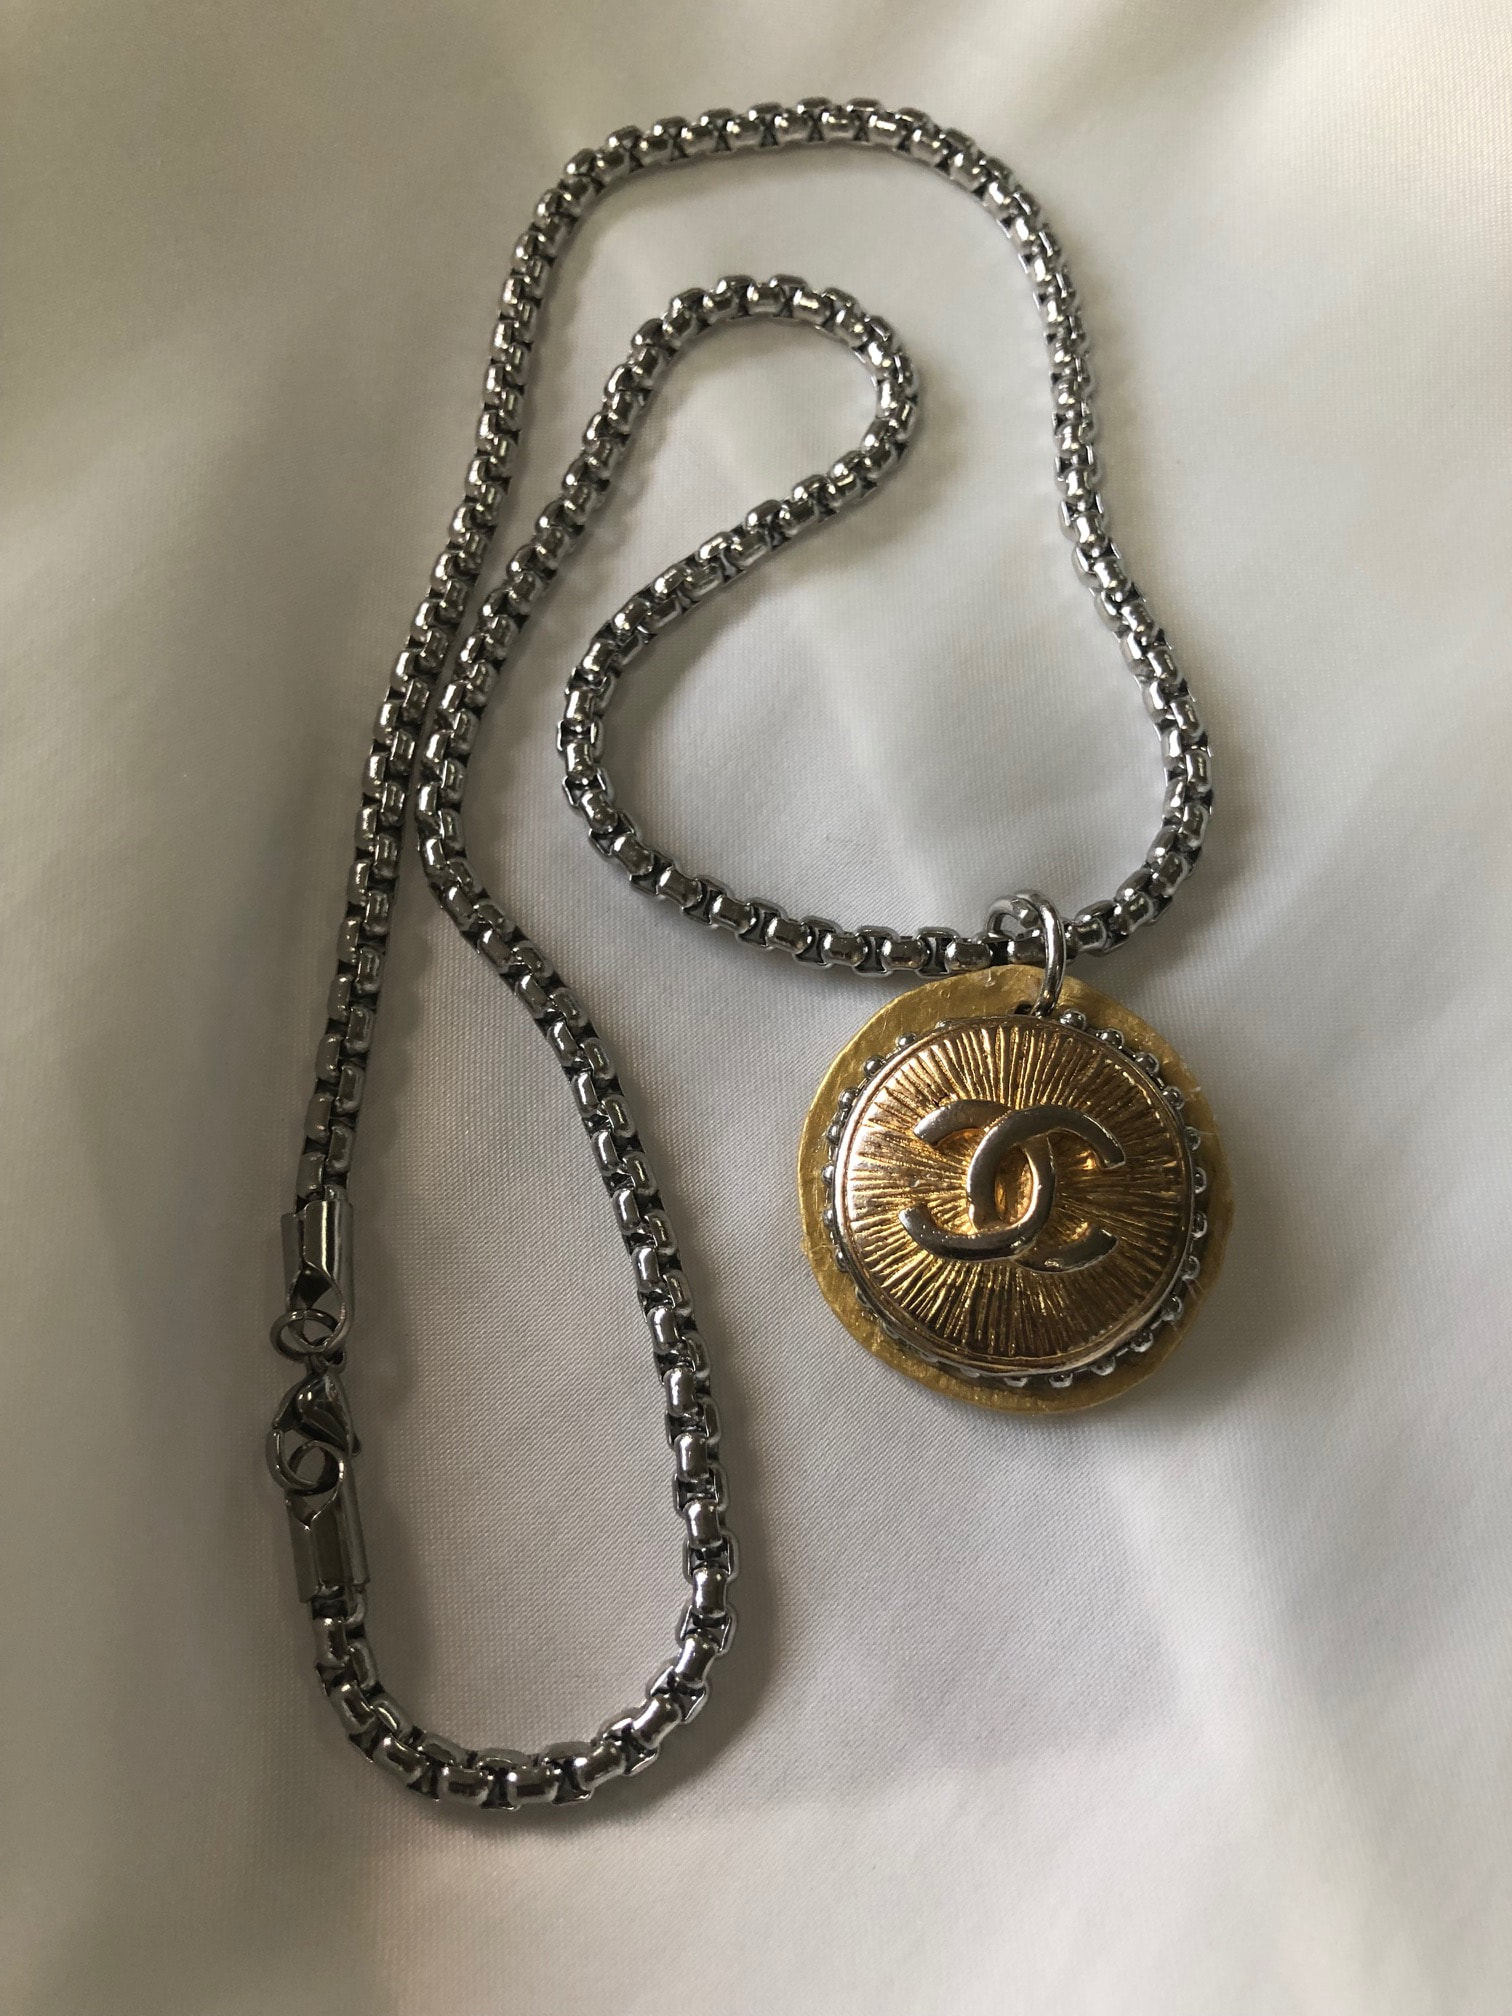 Reworked Vintage Chanel Button Necklace, Repurposed Designer Jewelry